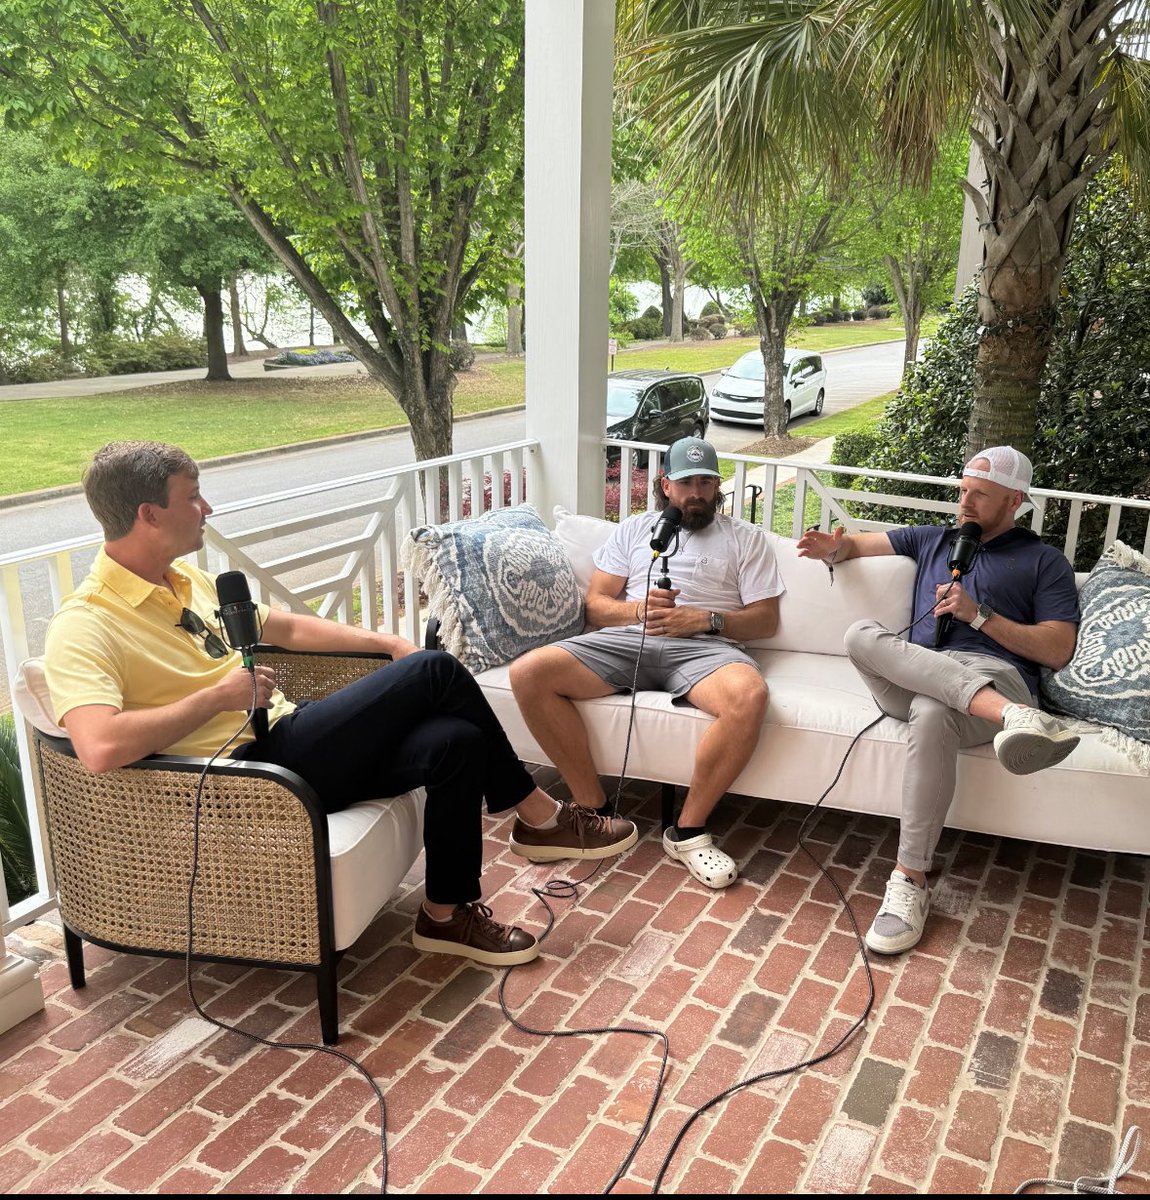 New @thesmylieshow episode out this week with Tyler and Garrett from @DudePerfect! Watch/listen ⬇️ 🍏: podcasts.apple.com/us/podcast/the… 📺: youtu.be/7AbRNvaH3yk?si… Spotify: open.spotify.com/episode/2g36IP…